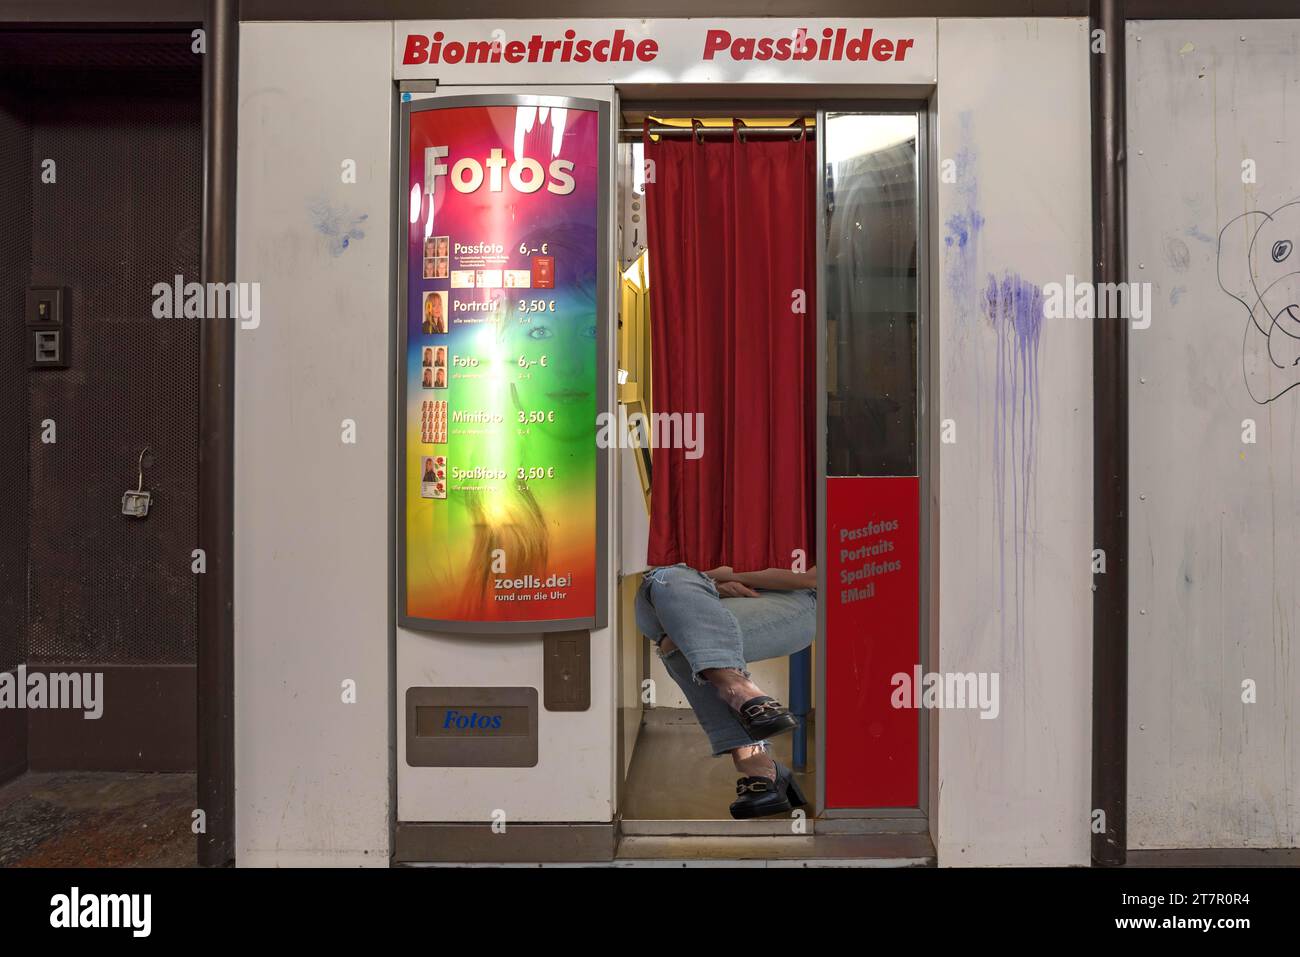 Vending machine for passport photos in a public department stores', Nuremberg, Middle Franconia, Bavaria, Germany Stock Photo